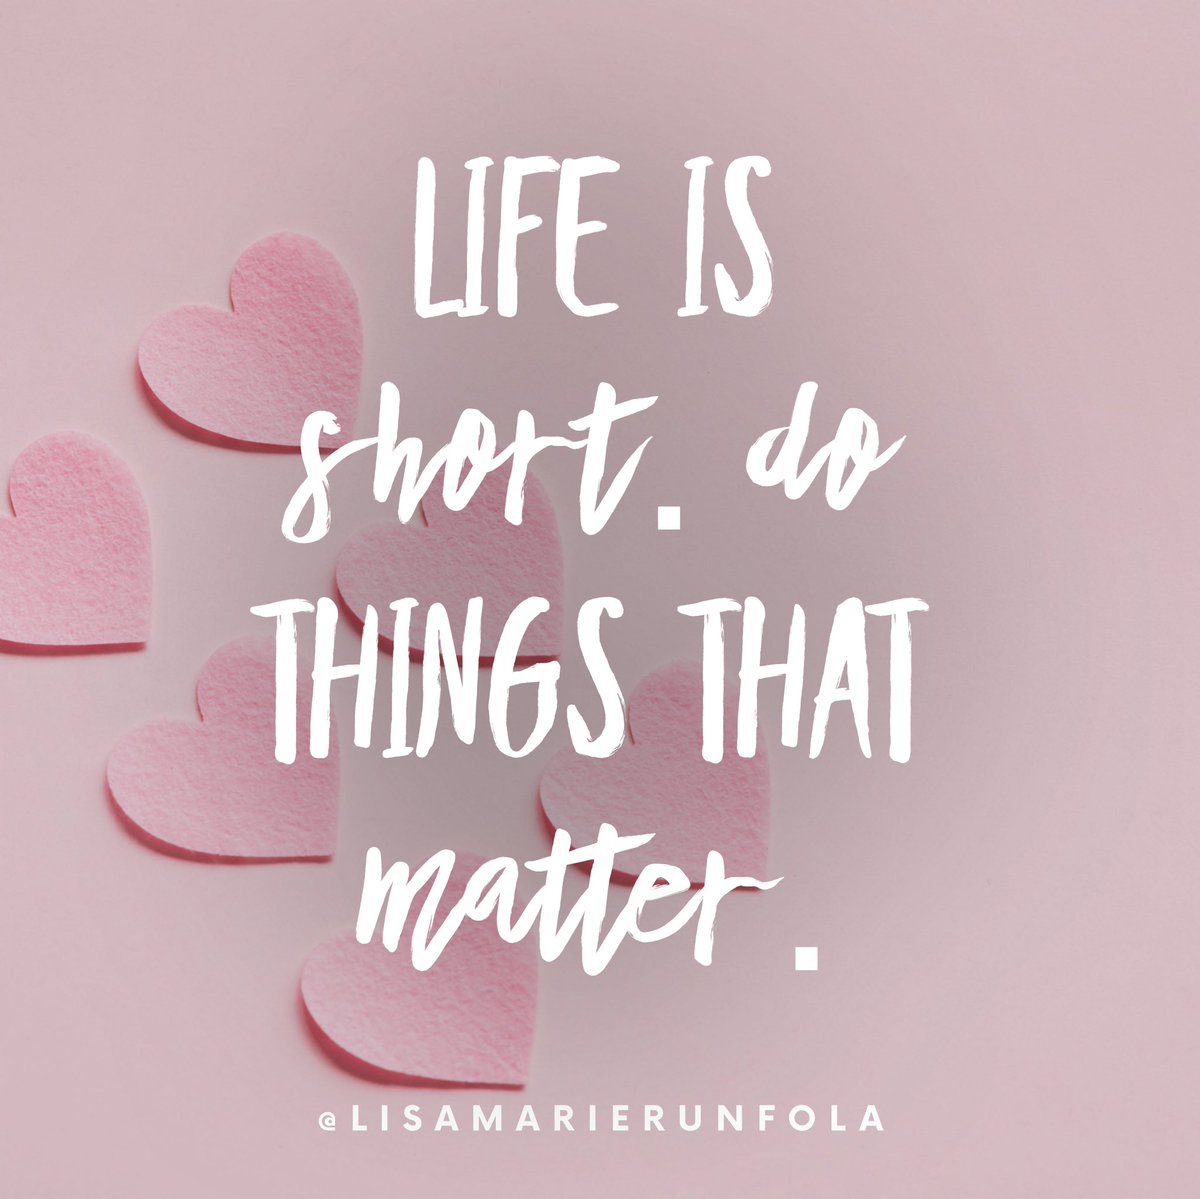 Life is short!⏳✨ Let's make every moment count and do what truly matters! #LifeIsShortDoWhatMatters #LiveWithPurpose #InspireOthers